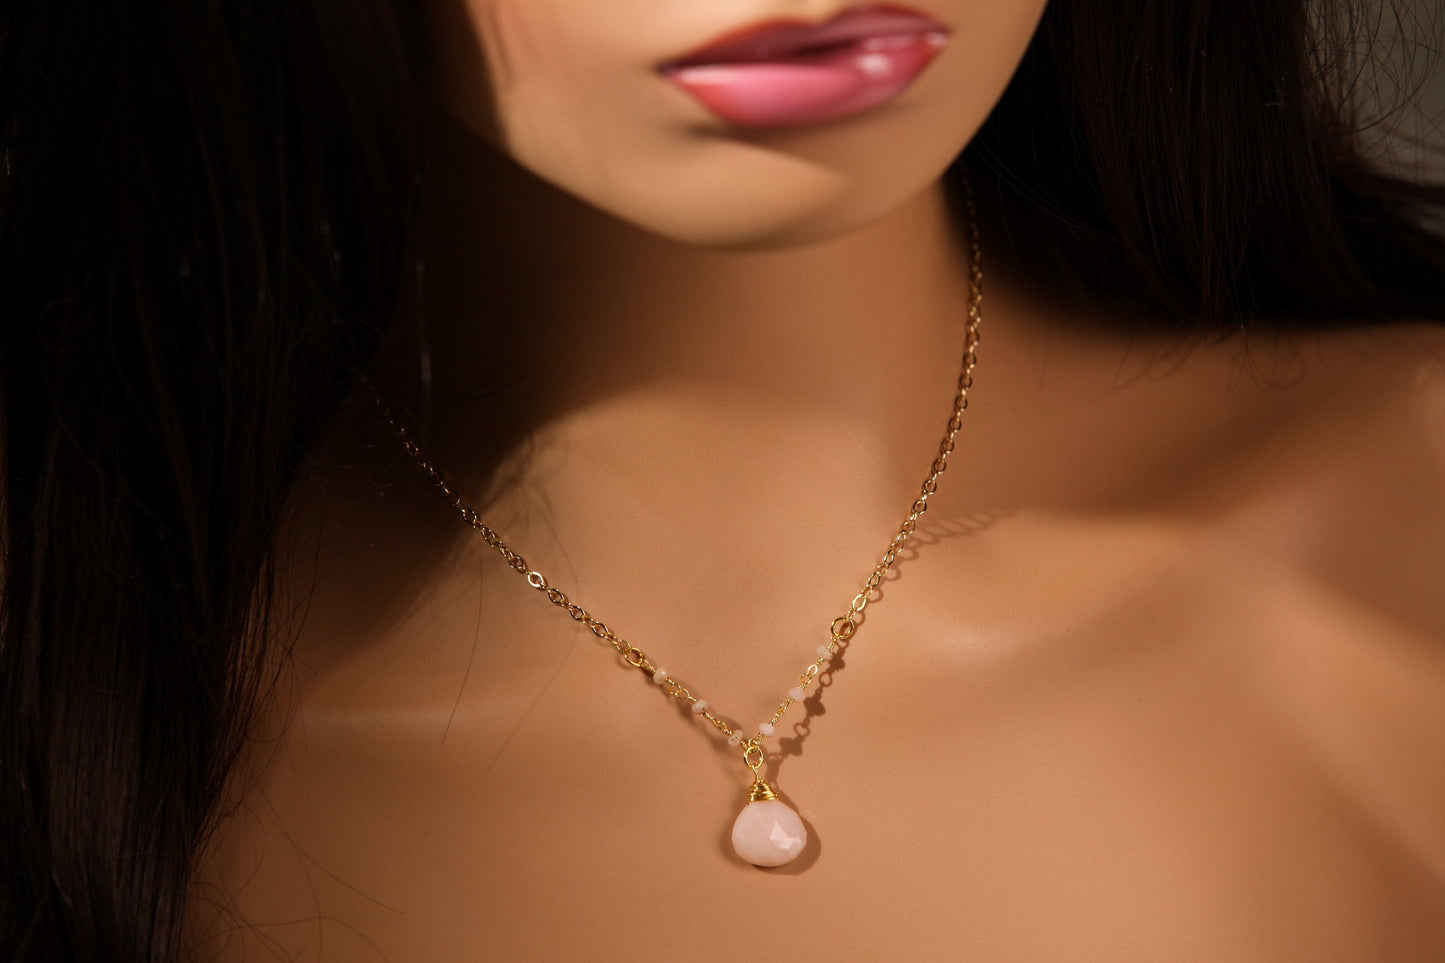 Pink Peruvian Opal Wire Wrapped Heart Shape Pear Drop in 14K Gold Filled Chain Necklace, Minimalist, Gift valentines gift